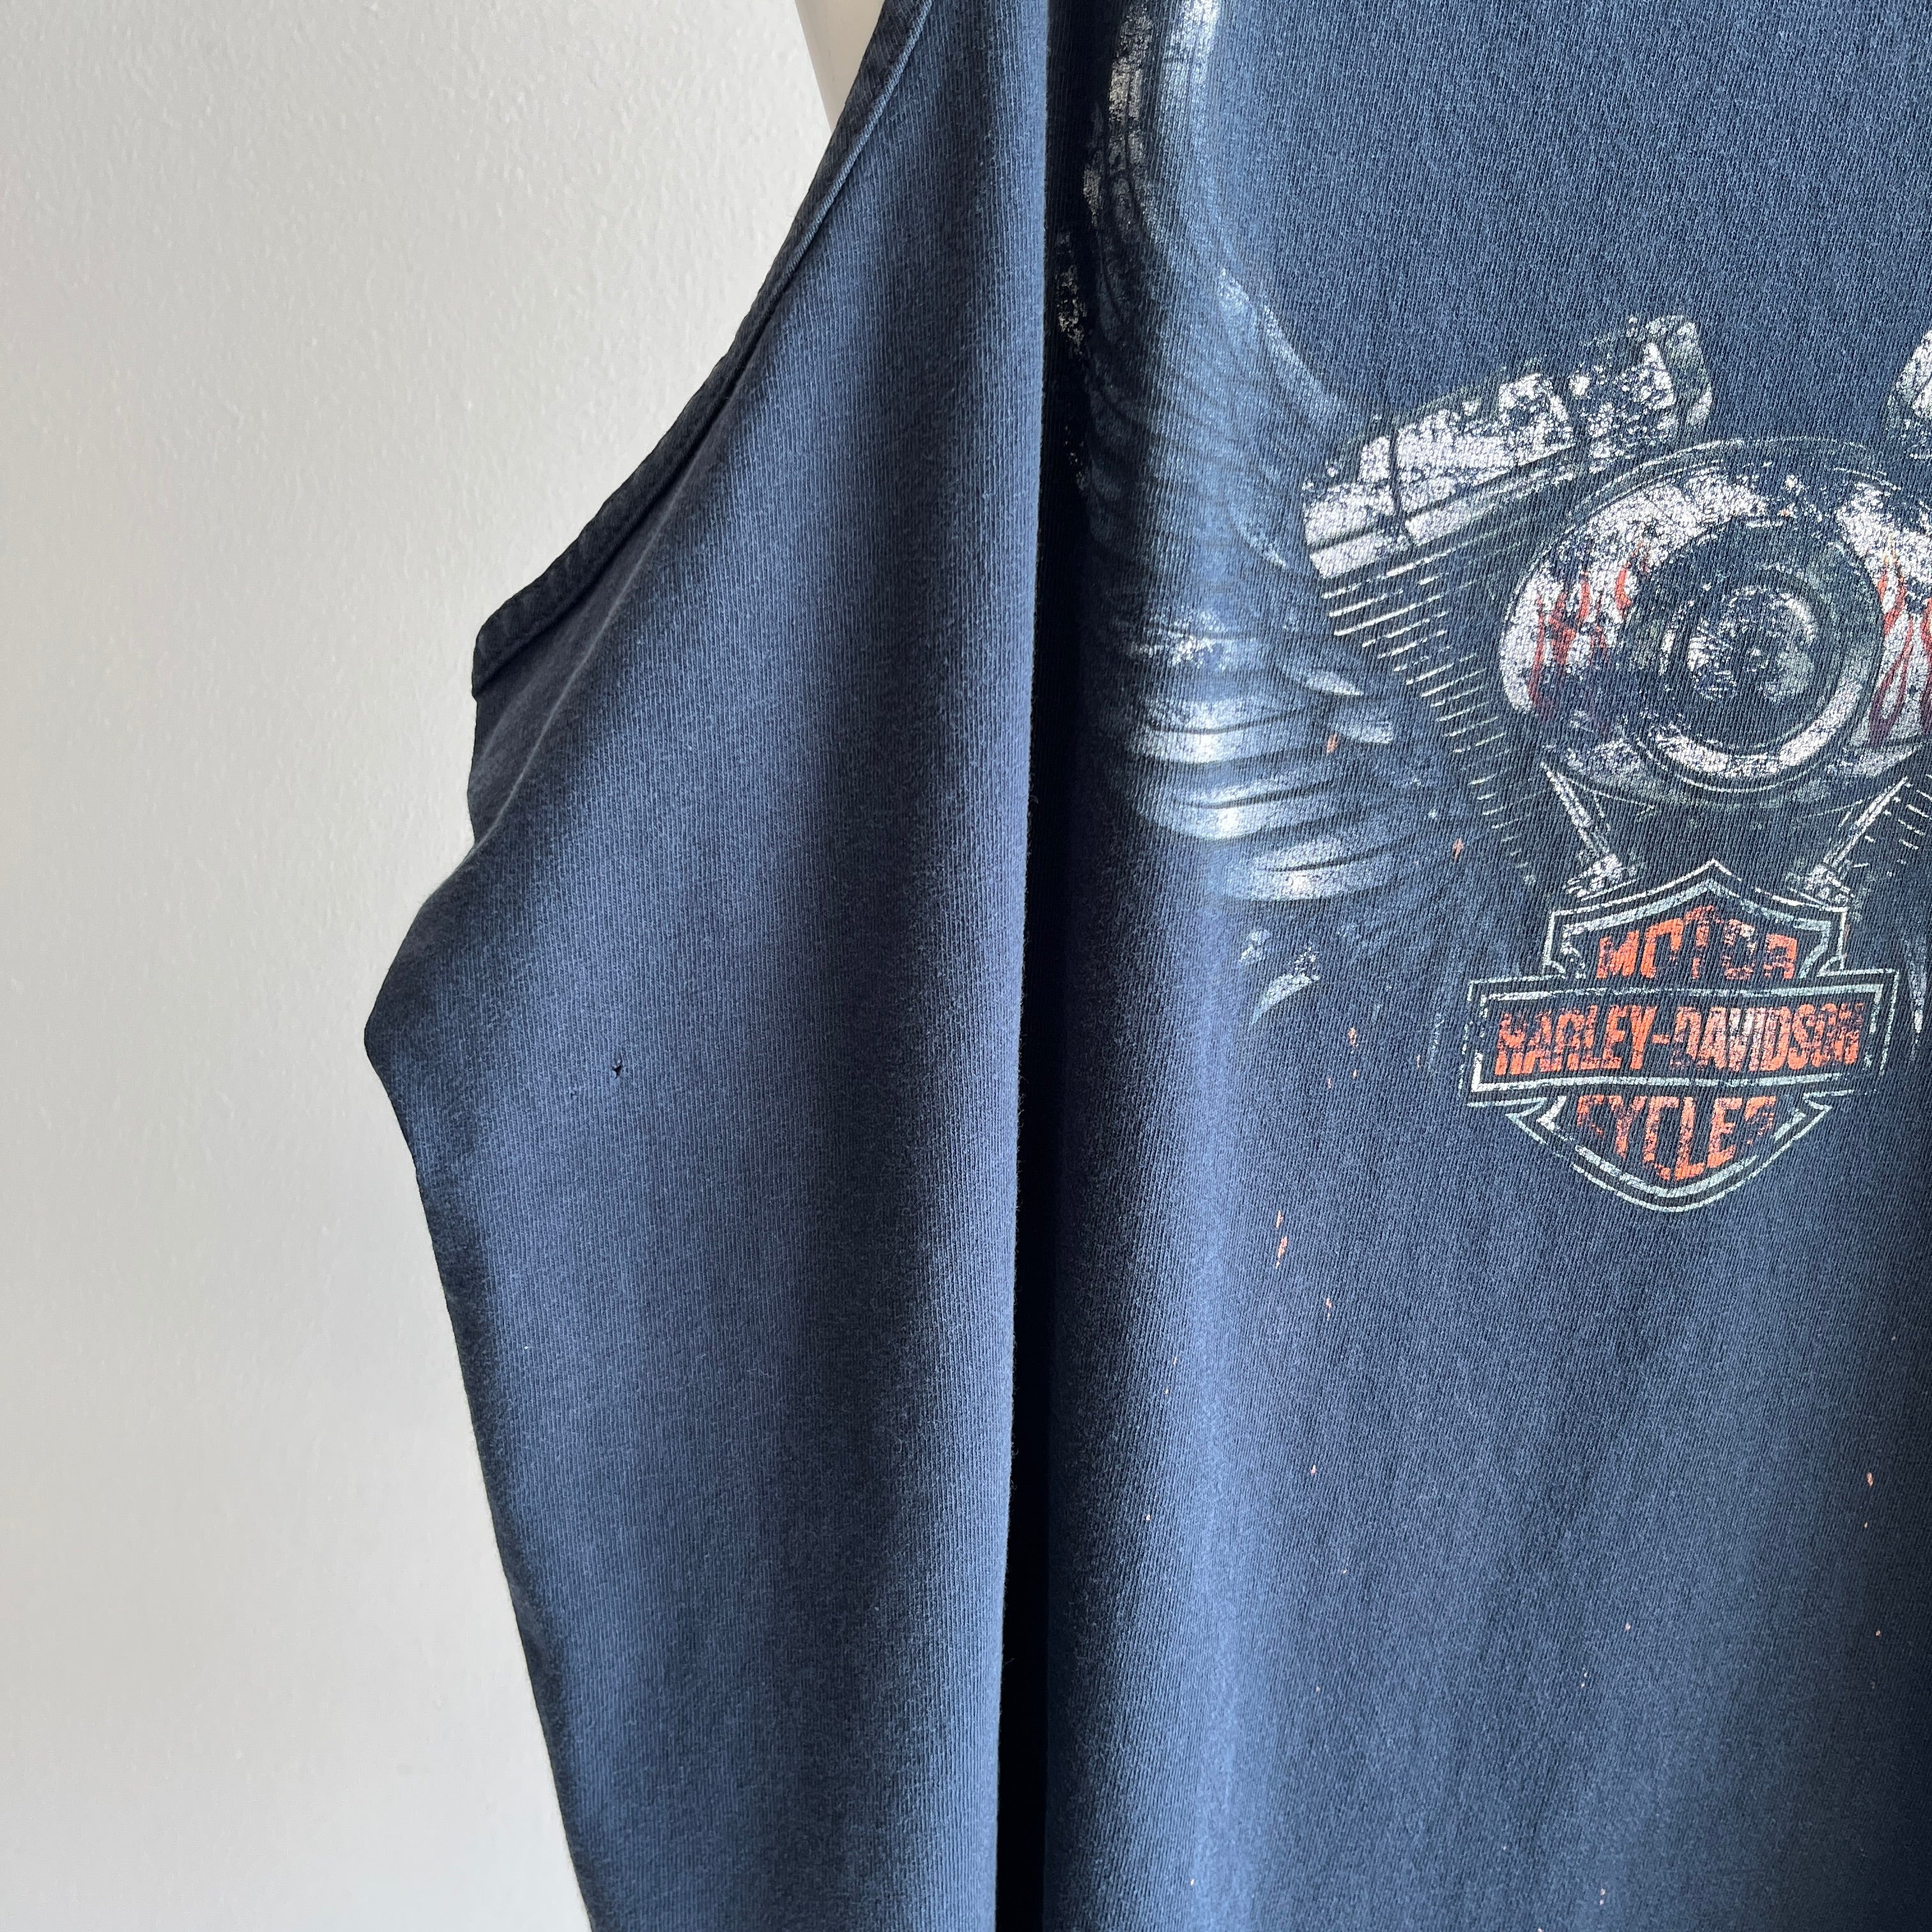 1990s Tattered Torn and Worn Loveland, Colorado Harley Tank